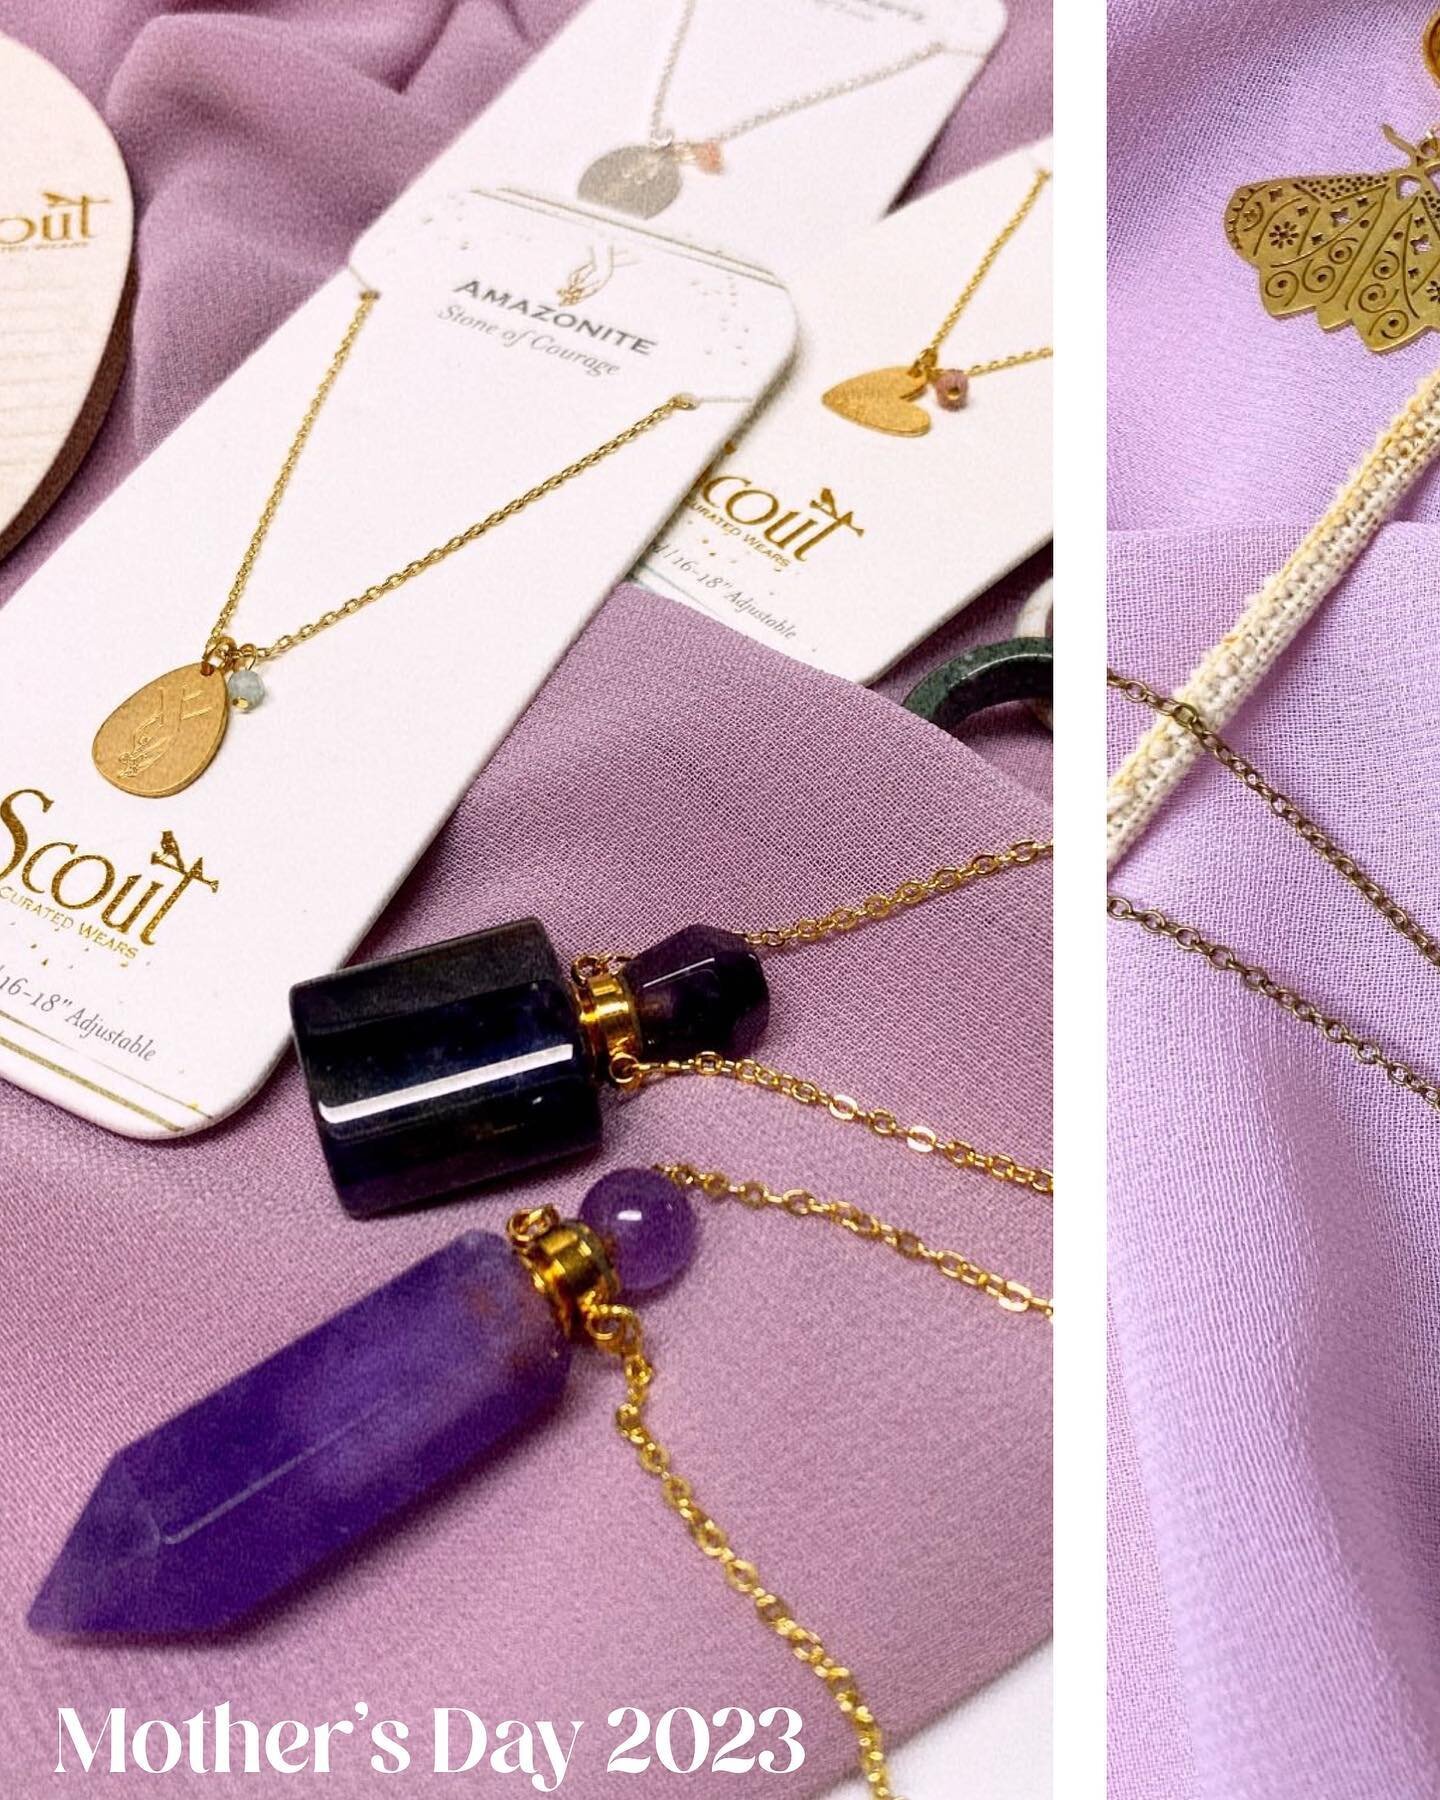 Mother&rsquo;s Day is THIS SUNDAY ! 💜
Let us help you make gift giving easy with our wide selection of jewelry varying from $10-$100! Plus, you get FREE gift wrapping as well! 🤩